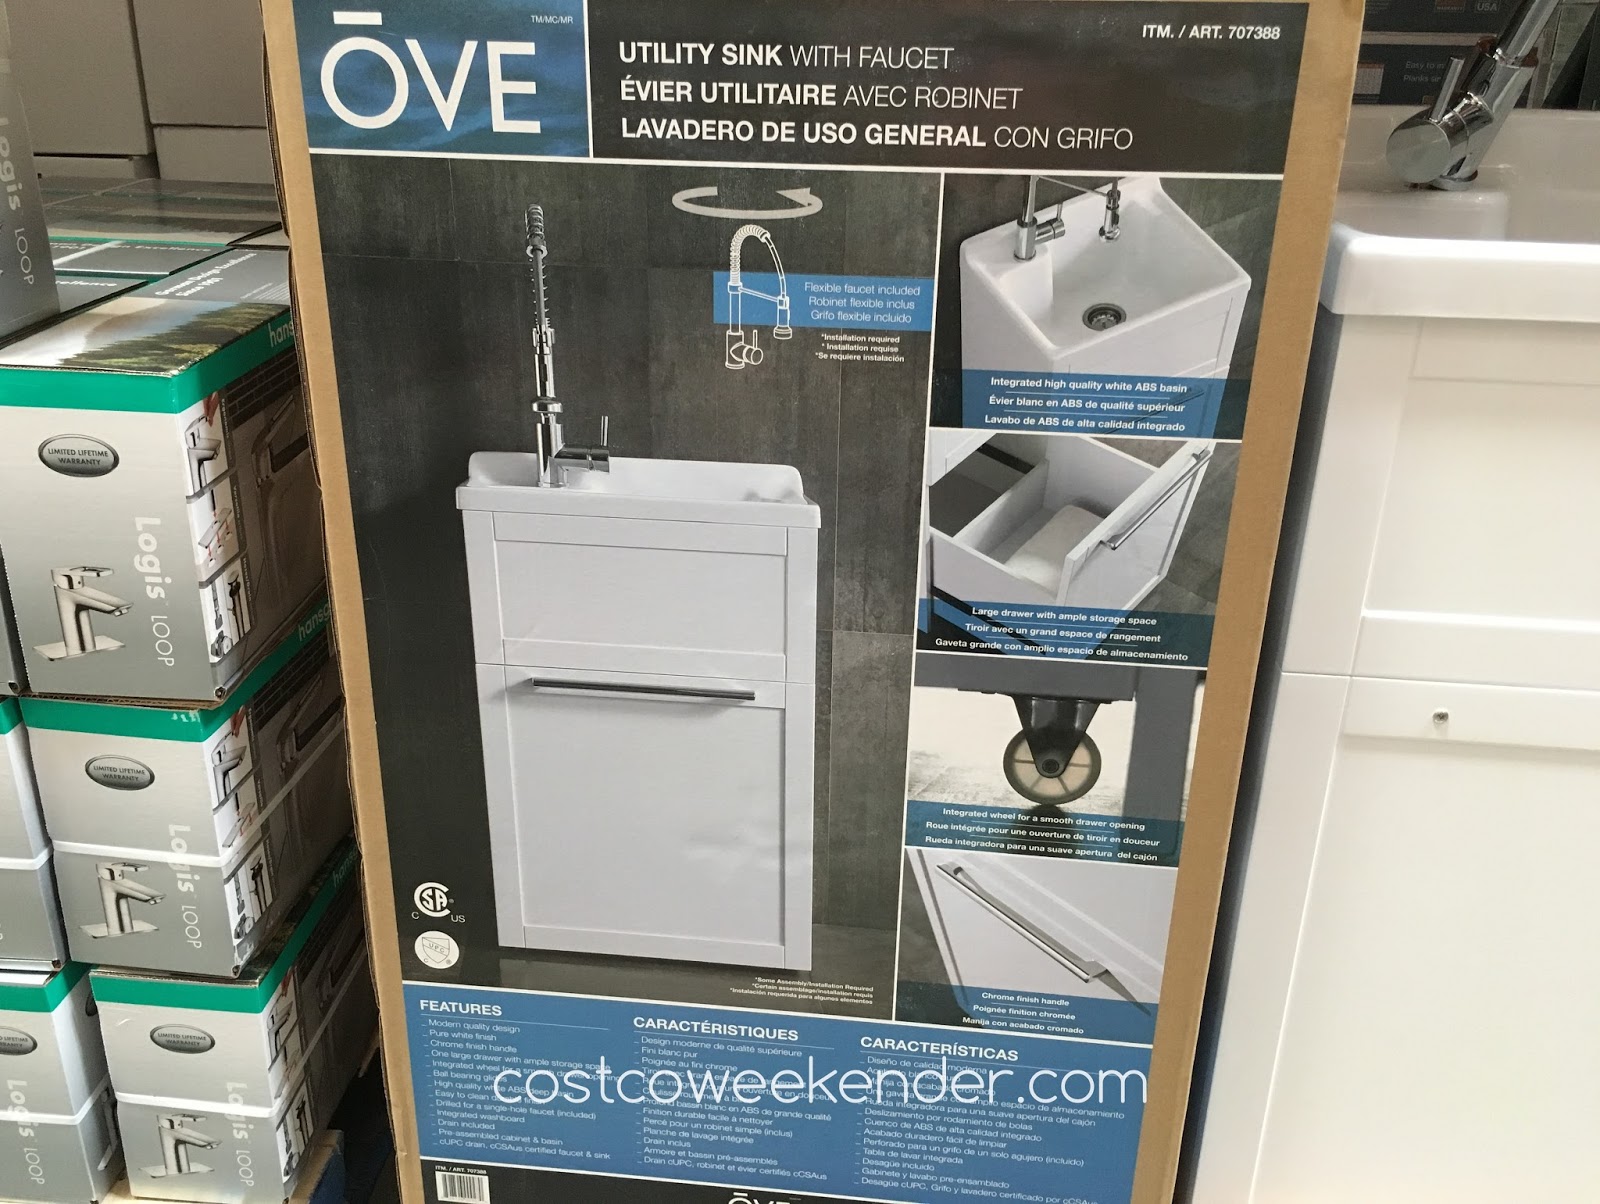 Ove Daisy Utility Sink With Faucet Costco Weekender